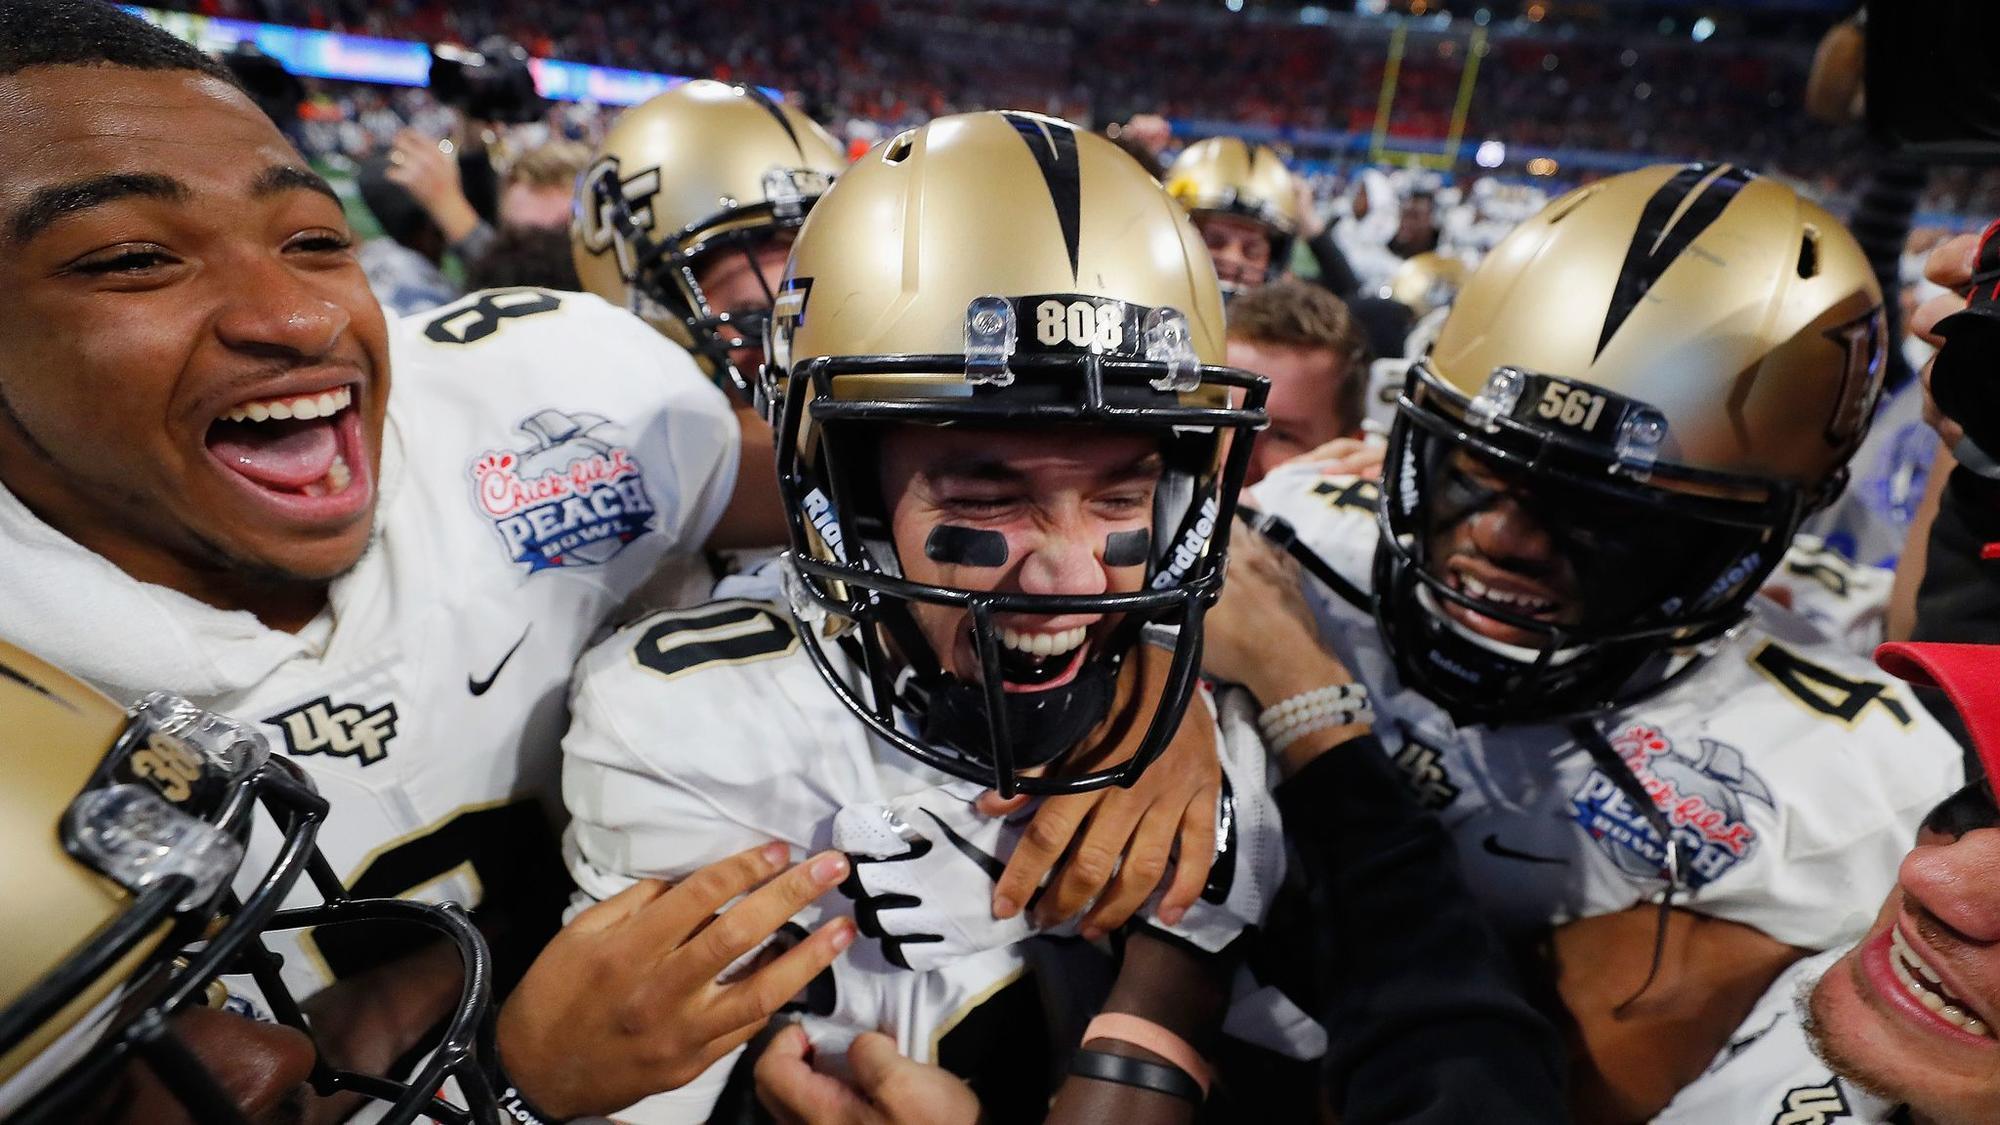 NFL to honor undefeated UCF football team during Pro Bowl - Orlando Sentinel